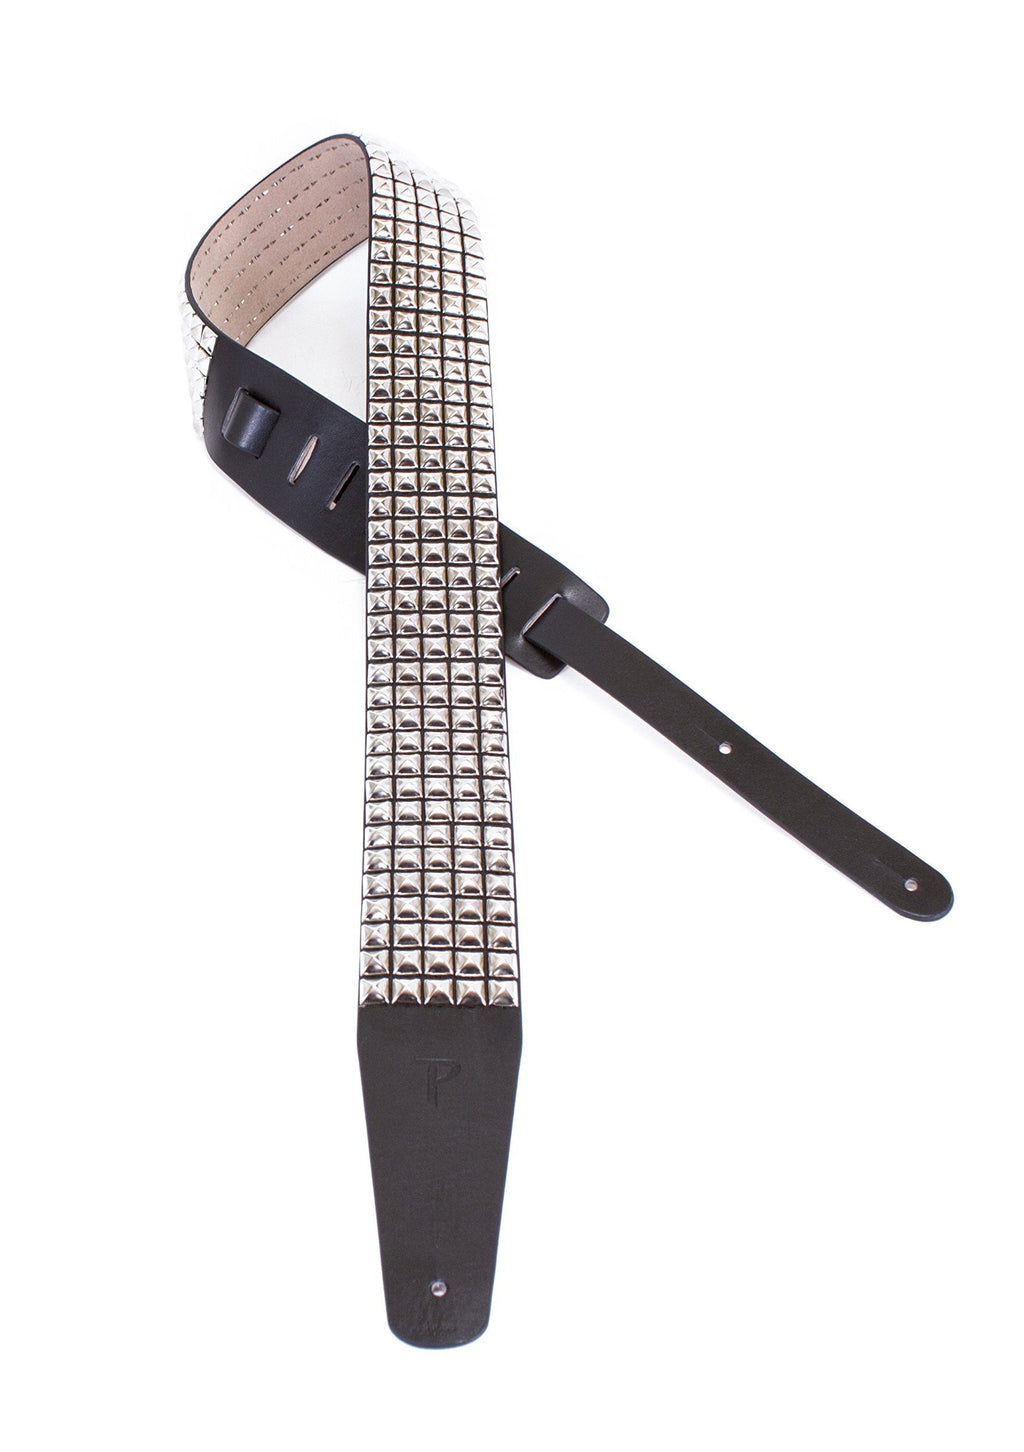 Perri's Leathers Studded Leather Guitar Strap, Silver, Strong, Durable, Comfortable, Adjustable Length 41” to 56”, 2.5" Wide